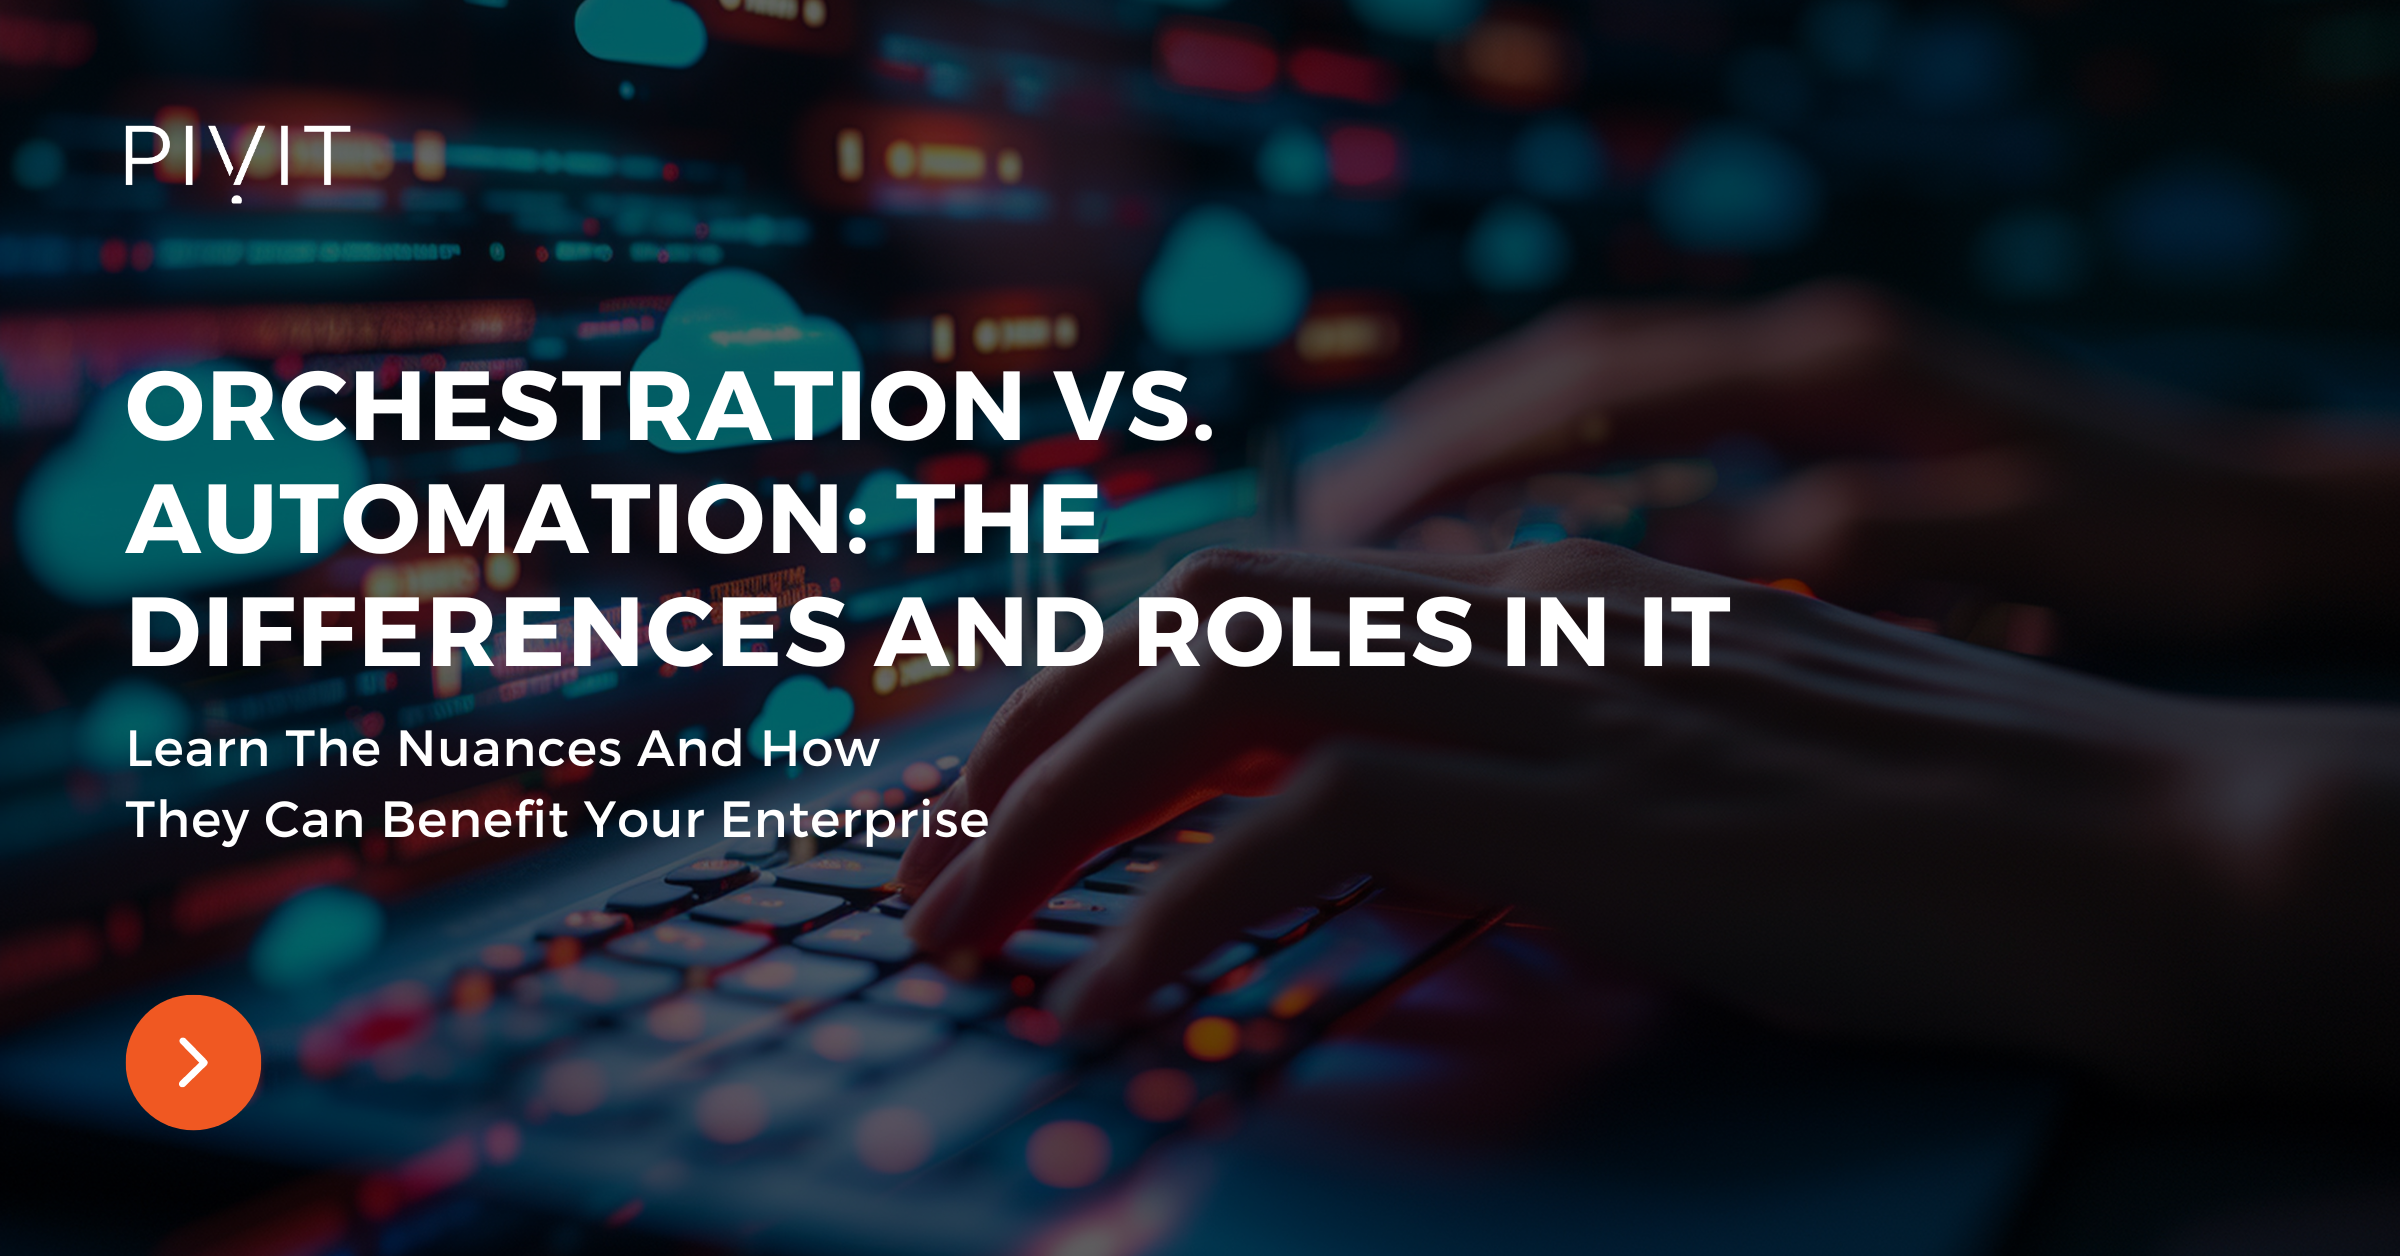 Orchestration Vs. Automation: The Differences And Roles In IT - Learn The Nuances And How They Can Benefit Your Enterprise